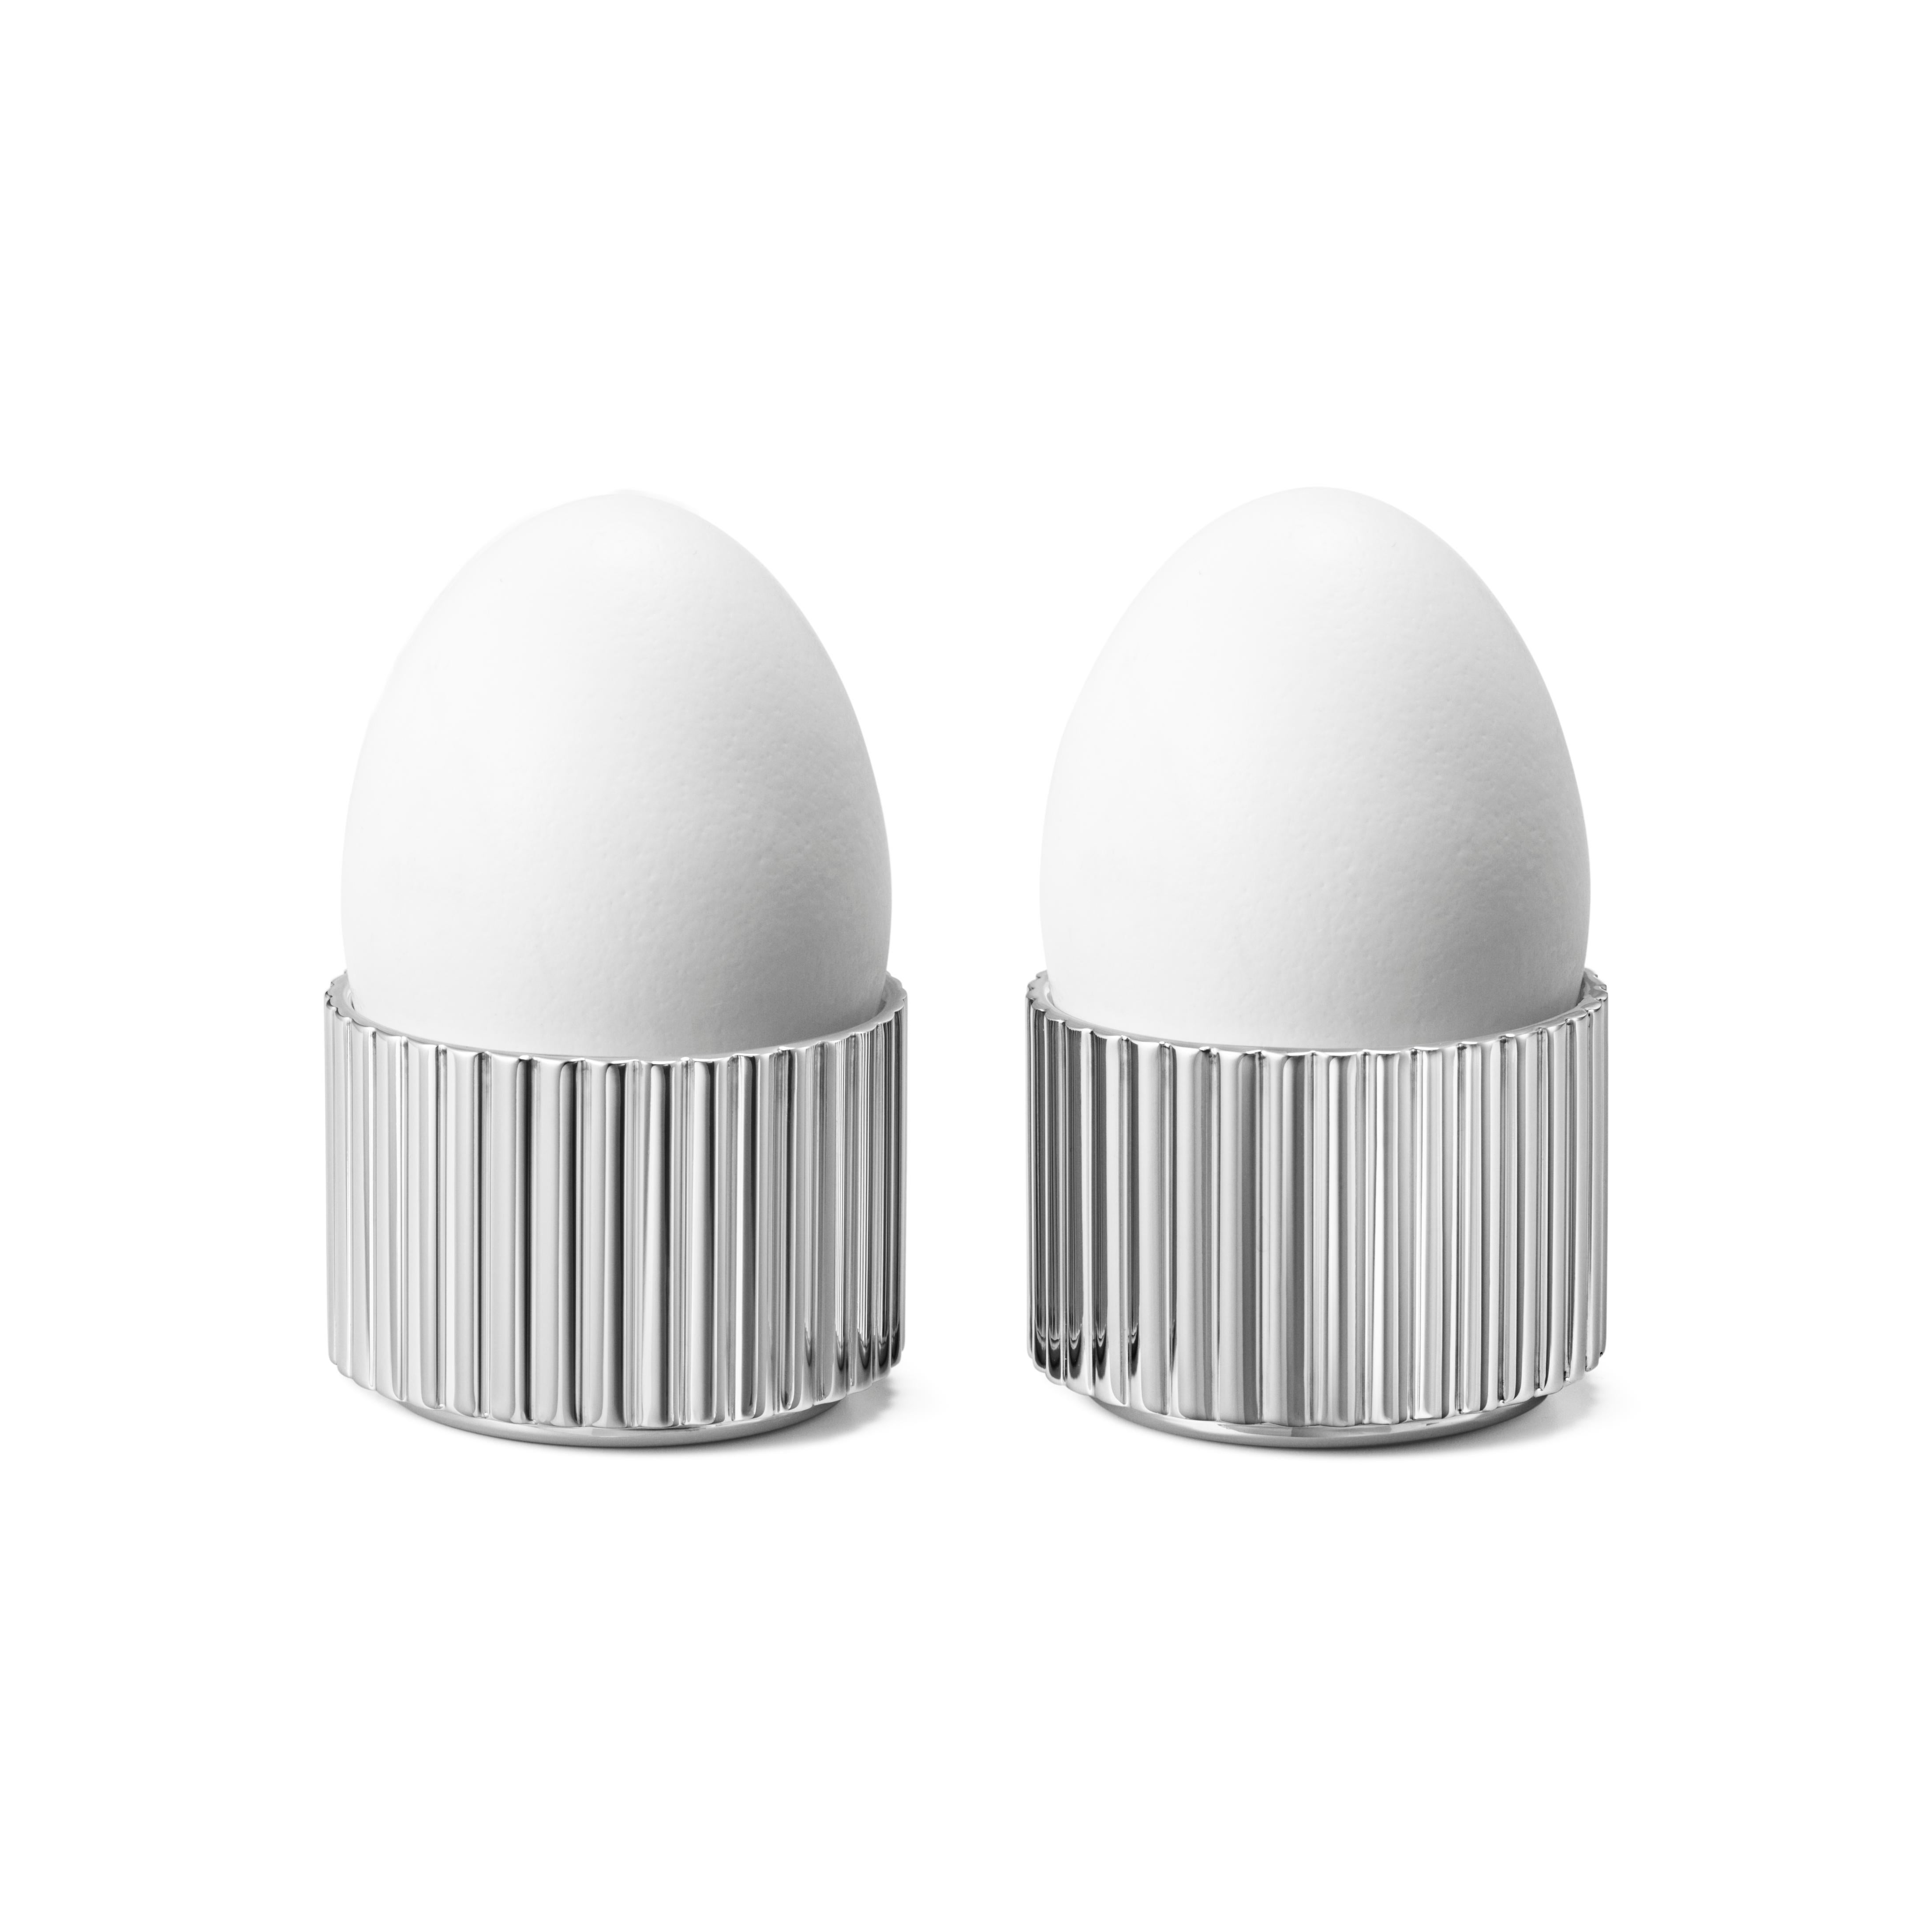 Bring a touch of timeless elegance to your table with the Bernadotte egg cup set. Inspired by riffled lines from the Art Deco period of the 1930s, the Bernadotte collection was originally launched in 1938 and designed by Swedish Prince Sigvard